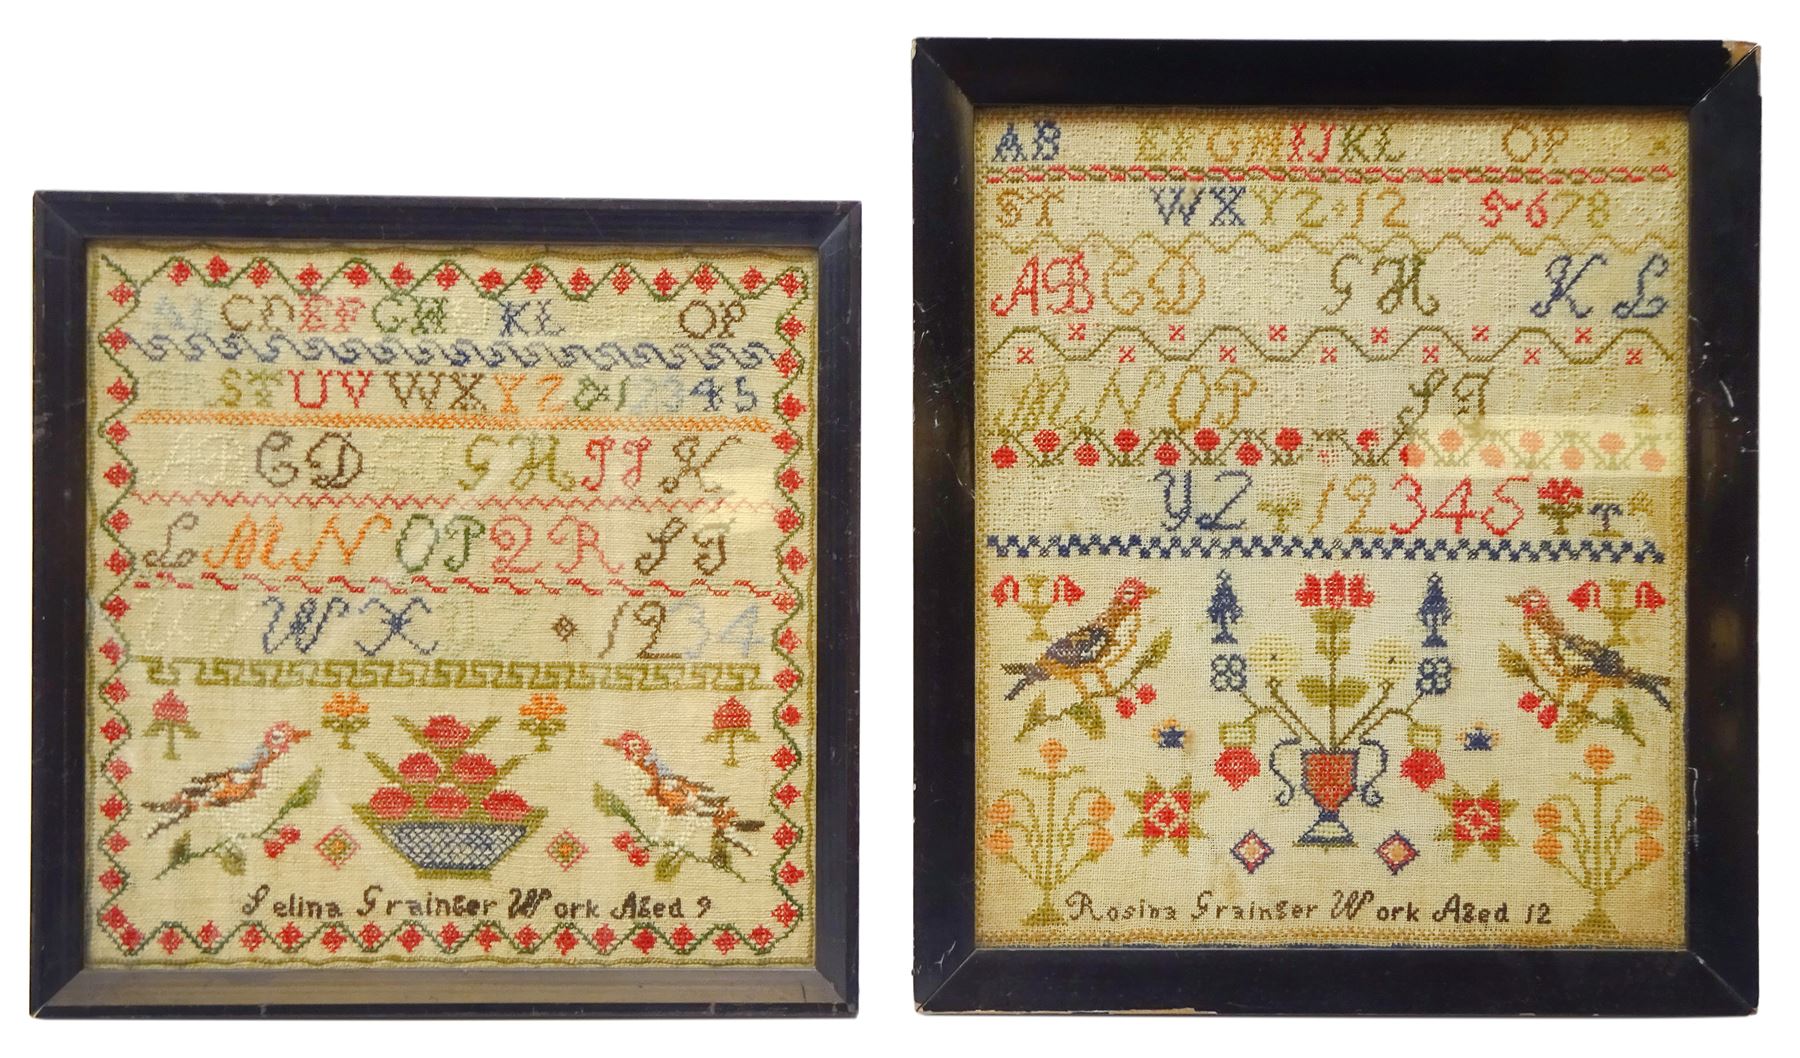 Two mid 19th century samplers